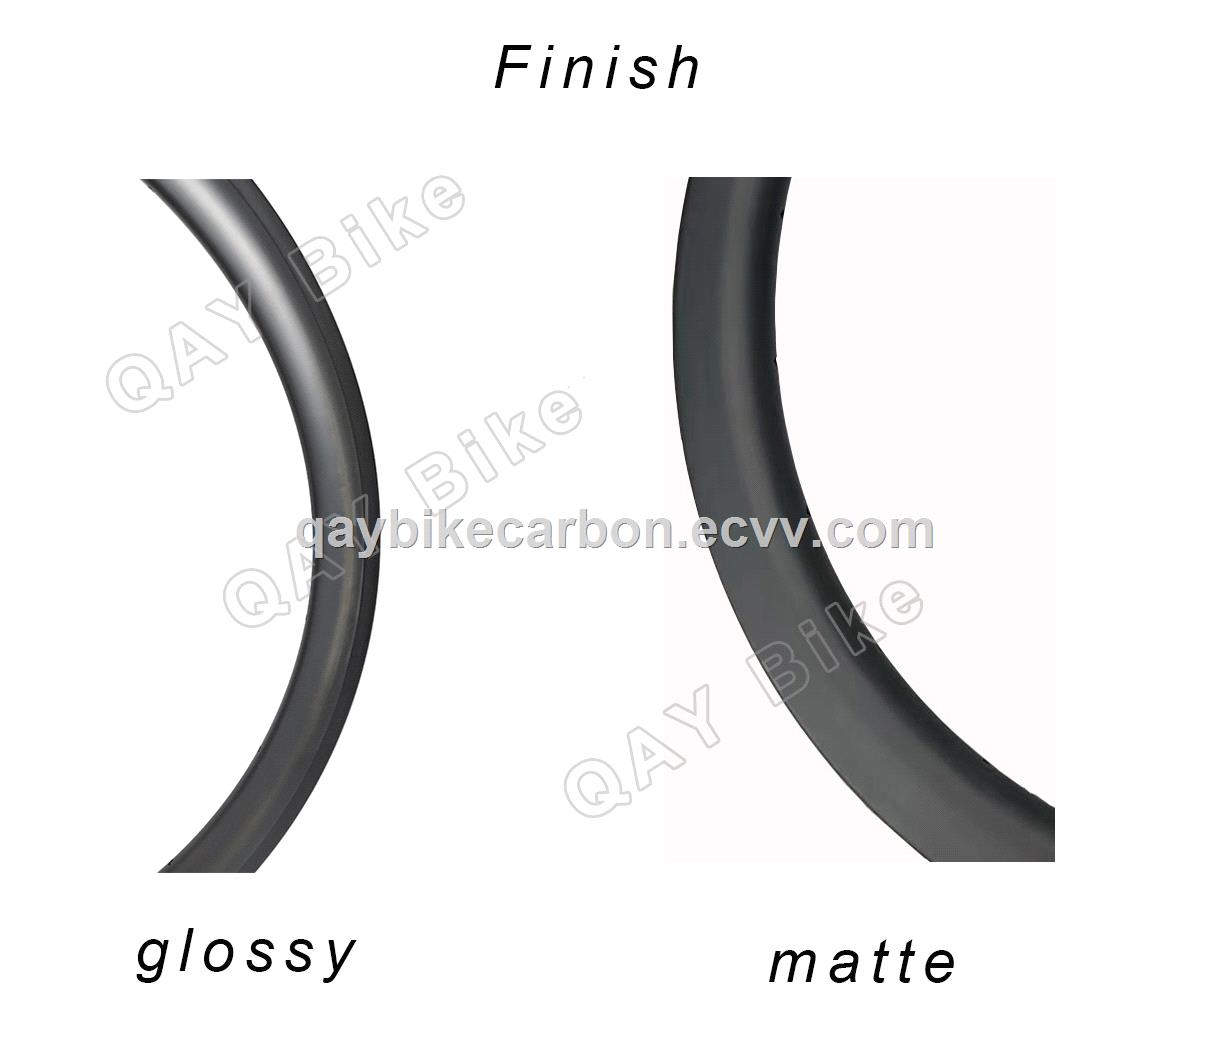 50mm Carbon Clincher Bicycle Wheels